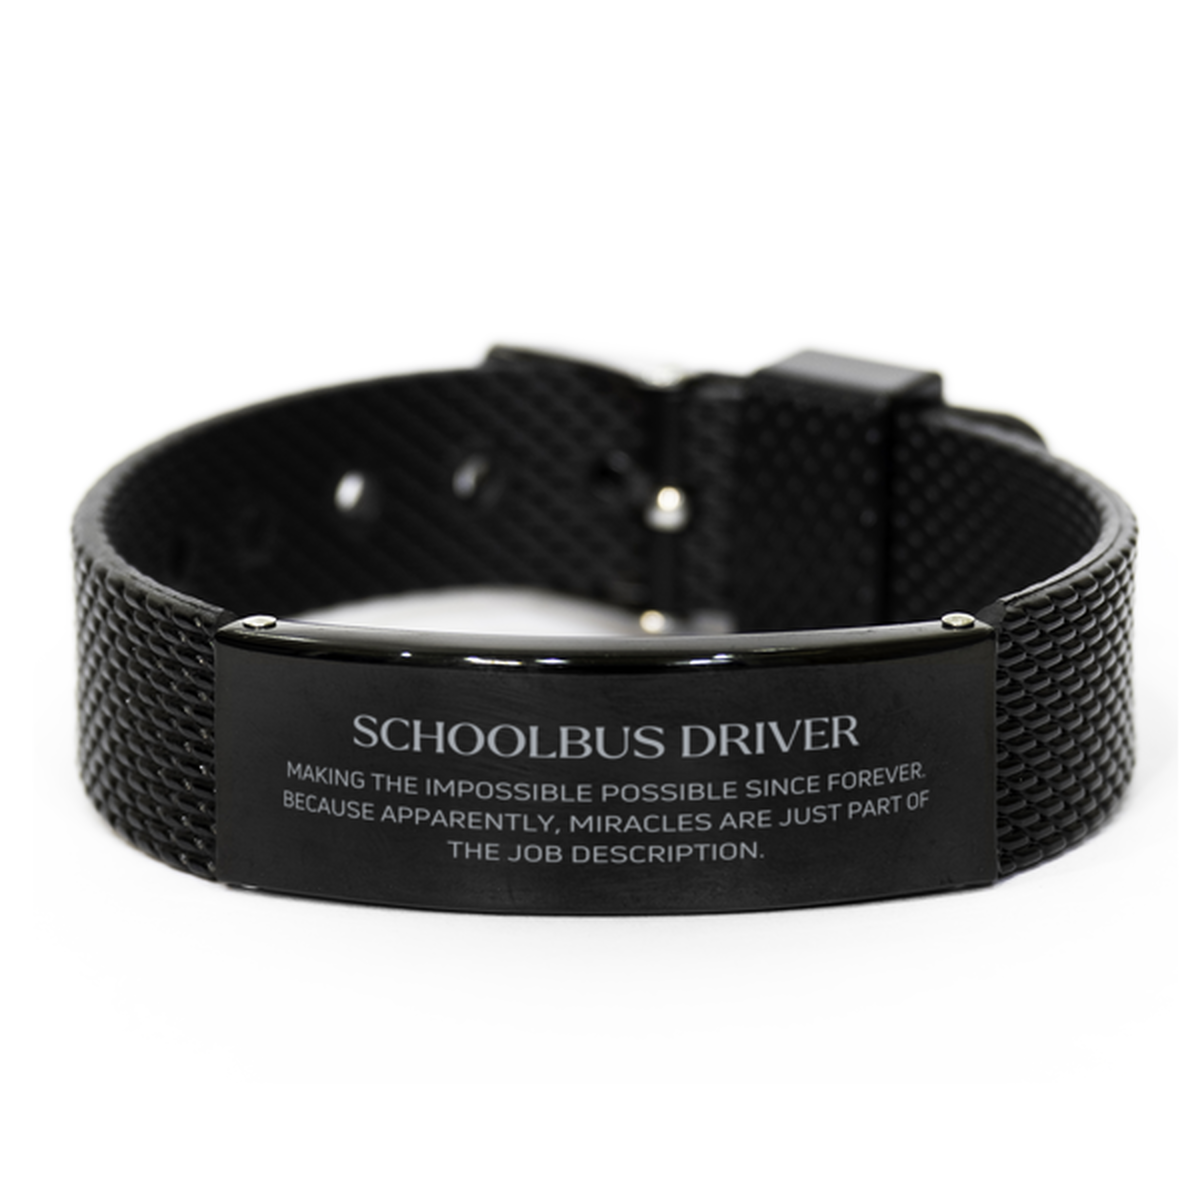 Funny Schoolbus Driver Gifts, Miracles are just part of the job description, Inspirational Birthday Black Shark Mesh Bracelet For Schoolbus Driver, Men, Women, Coworkers, Friends, Boss